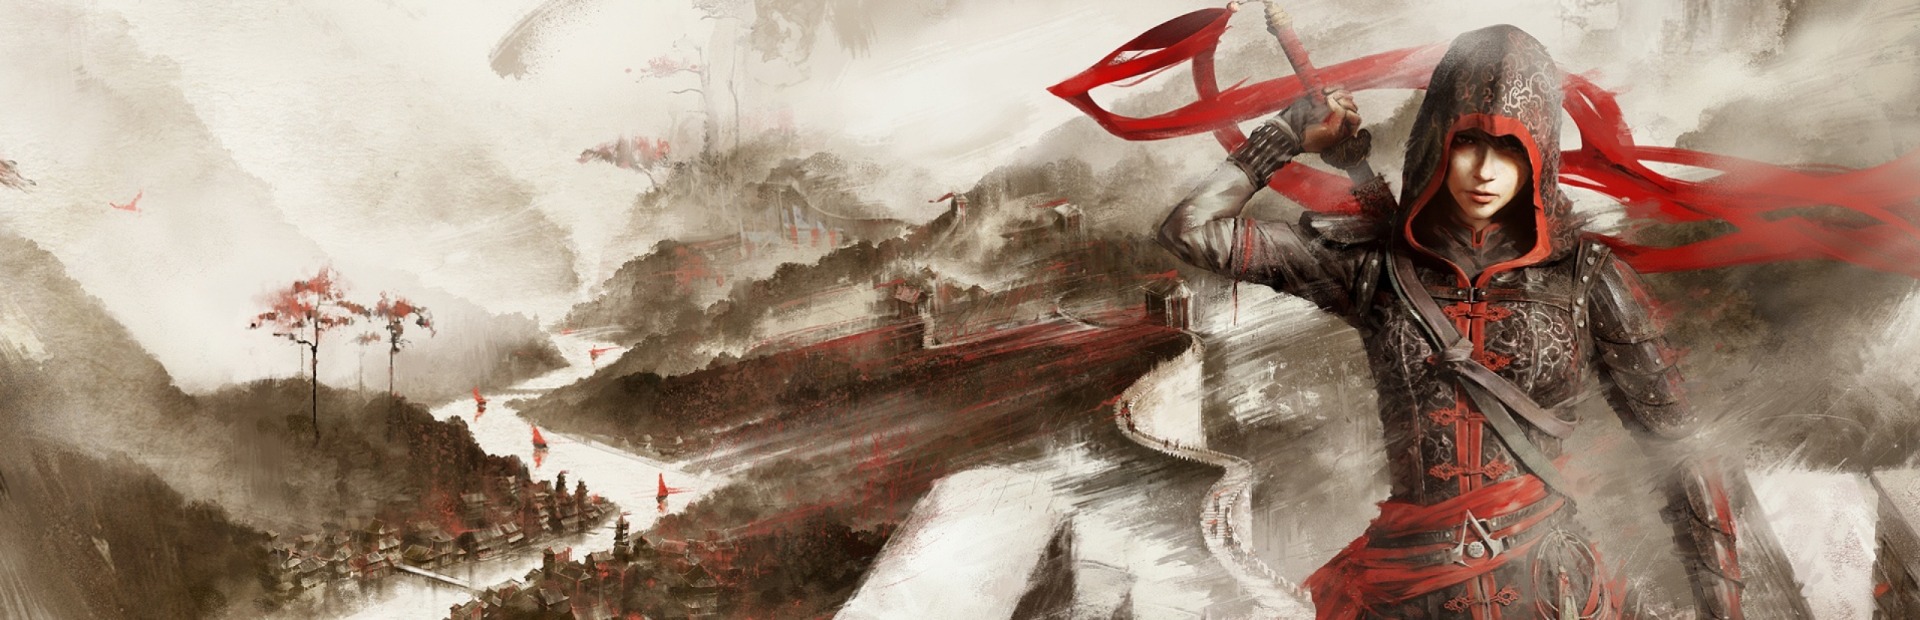 Assassins creed chronicles steam фото 60